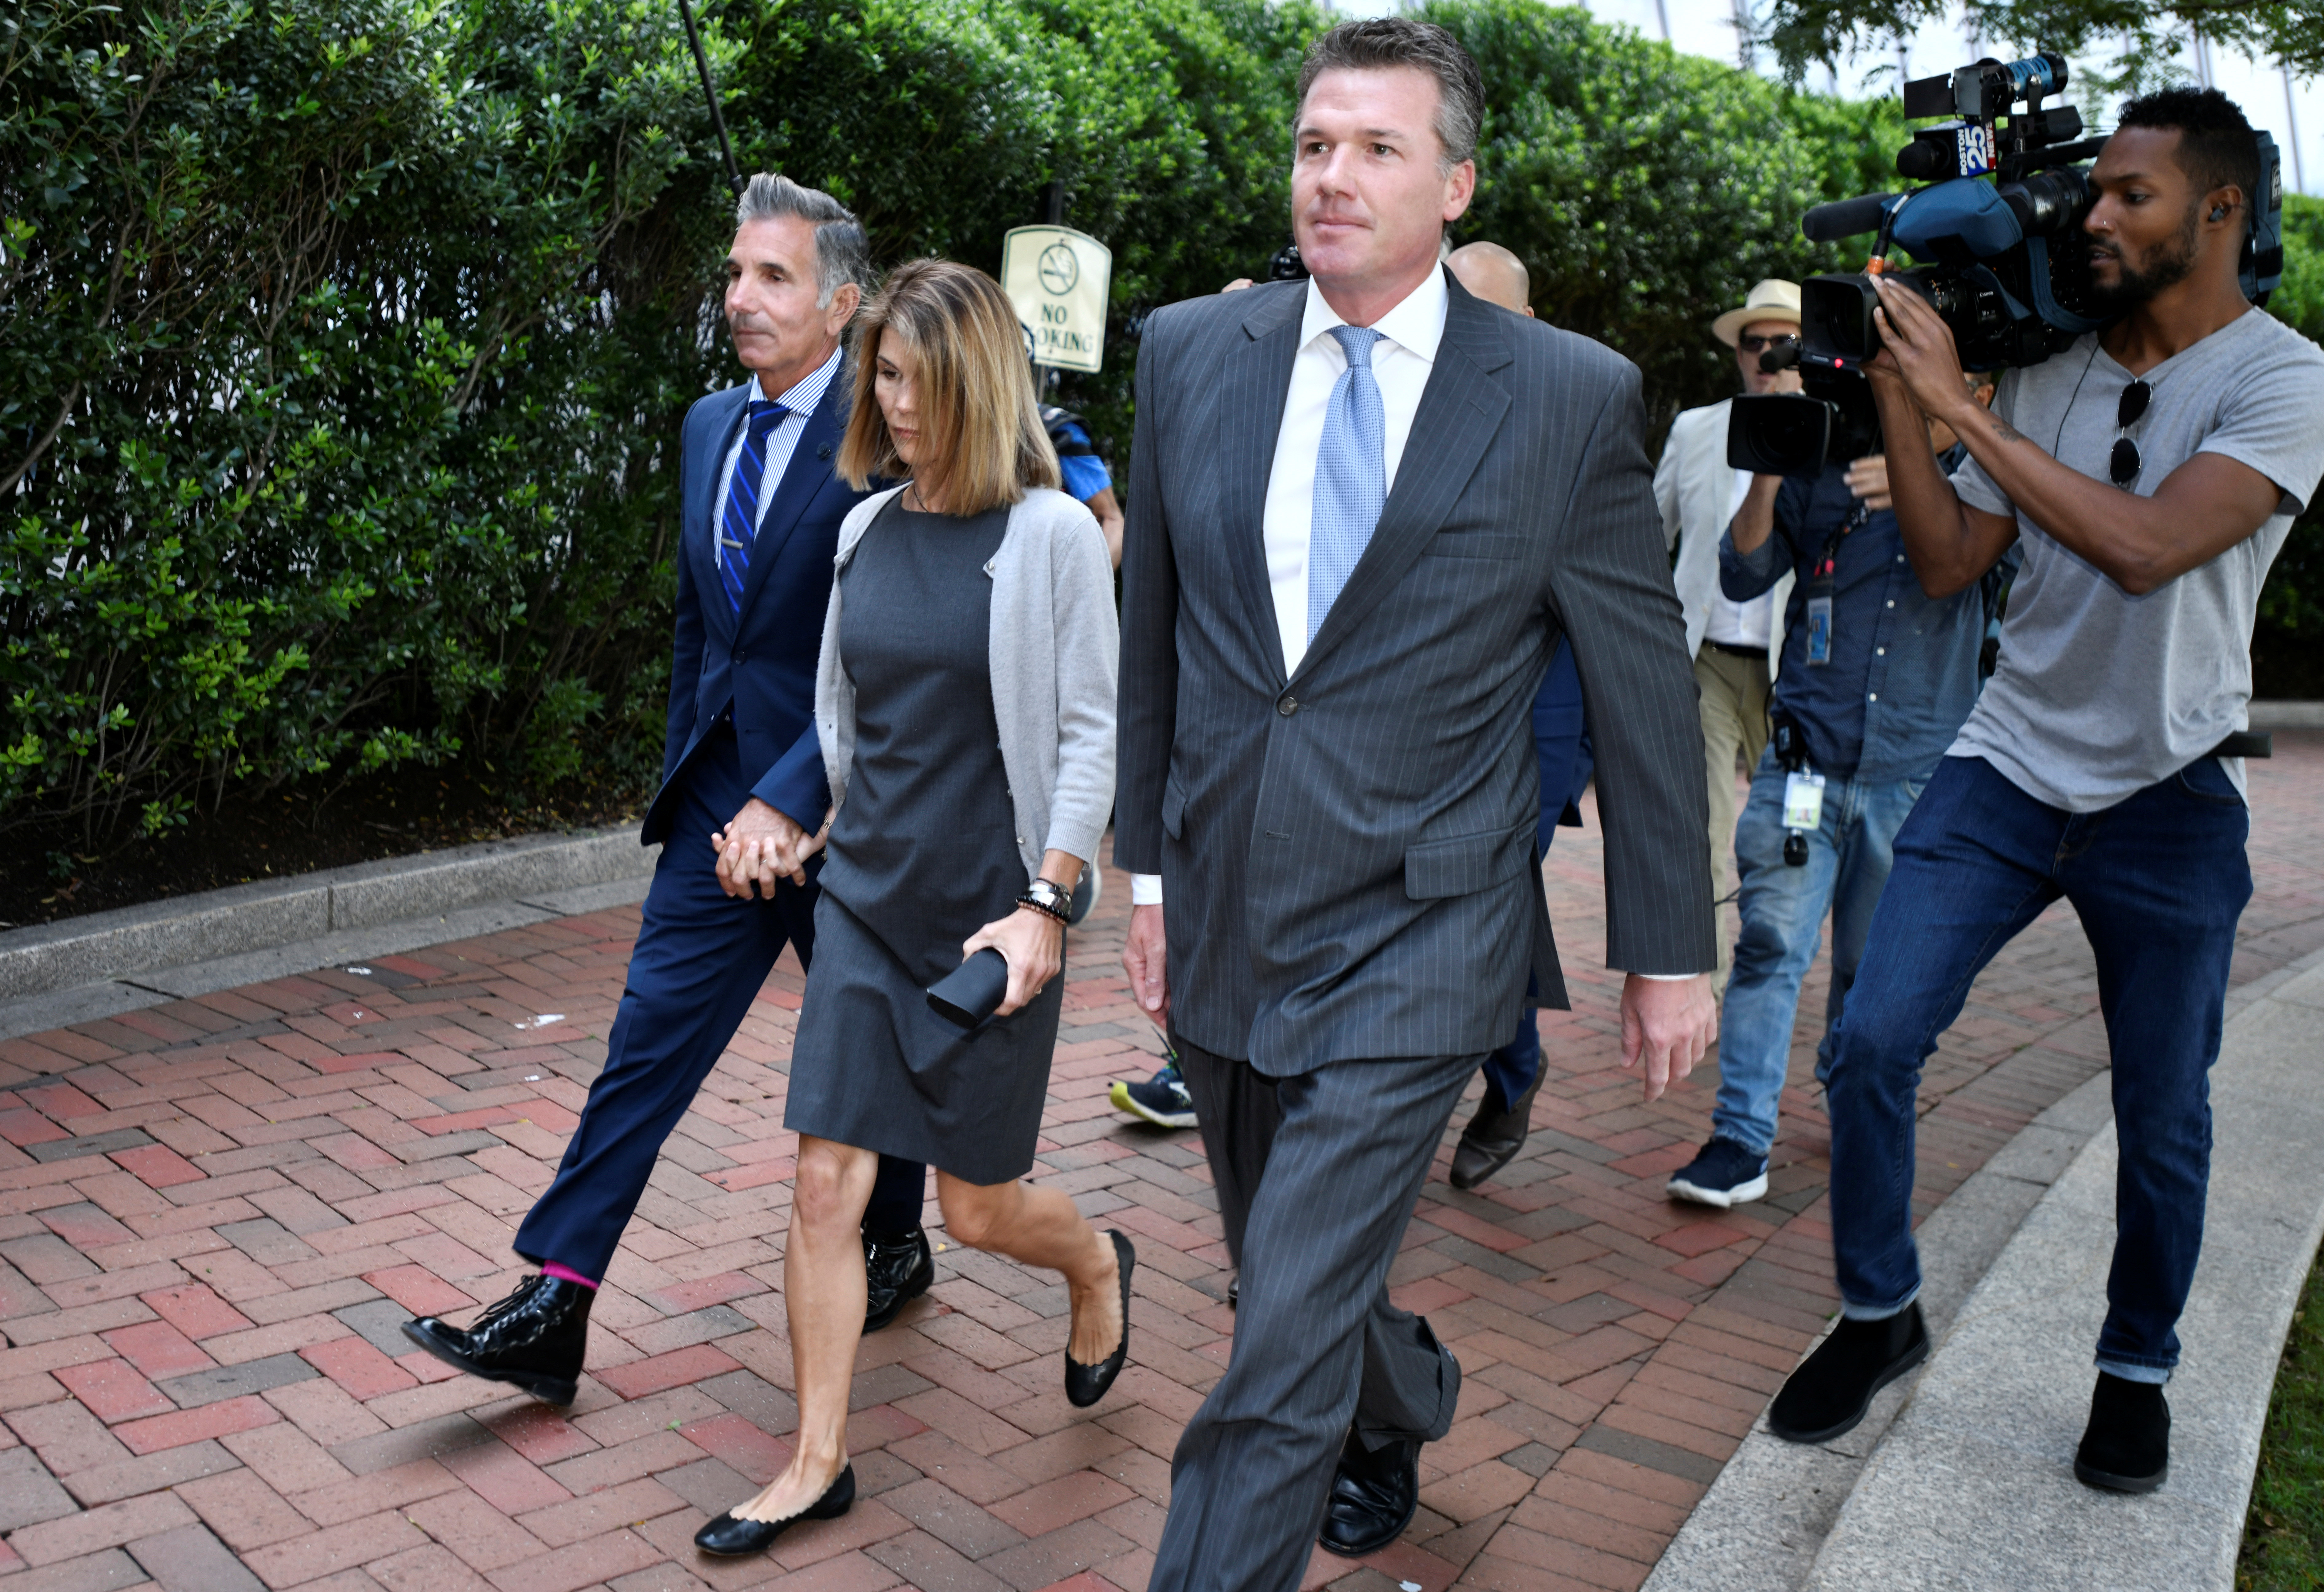 Actress Lori Loughlin and her husband, fashion designer Mossimo Giannulli, arrive at the federal courthouse for a hearing on charges in a nationwide college admissions cheating scheme in Boston, Massachusetts, U.S., August 27, 2019. REUTERS/Josh Reynolds